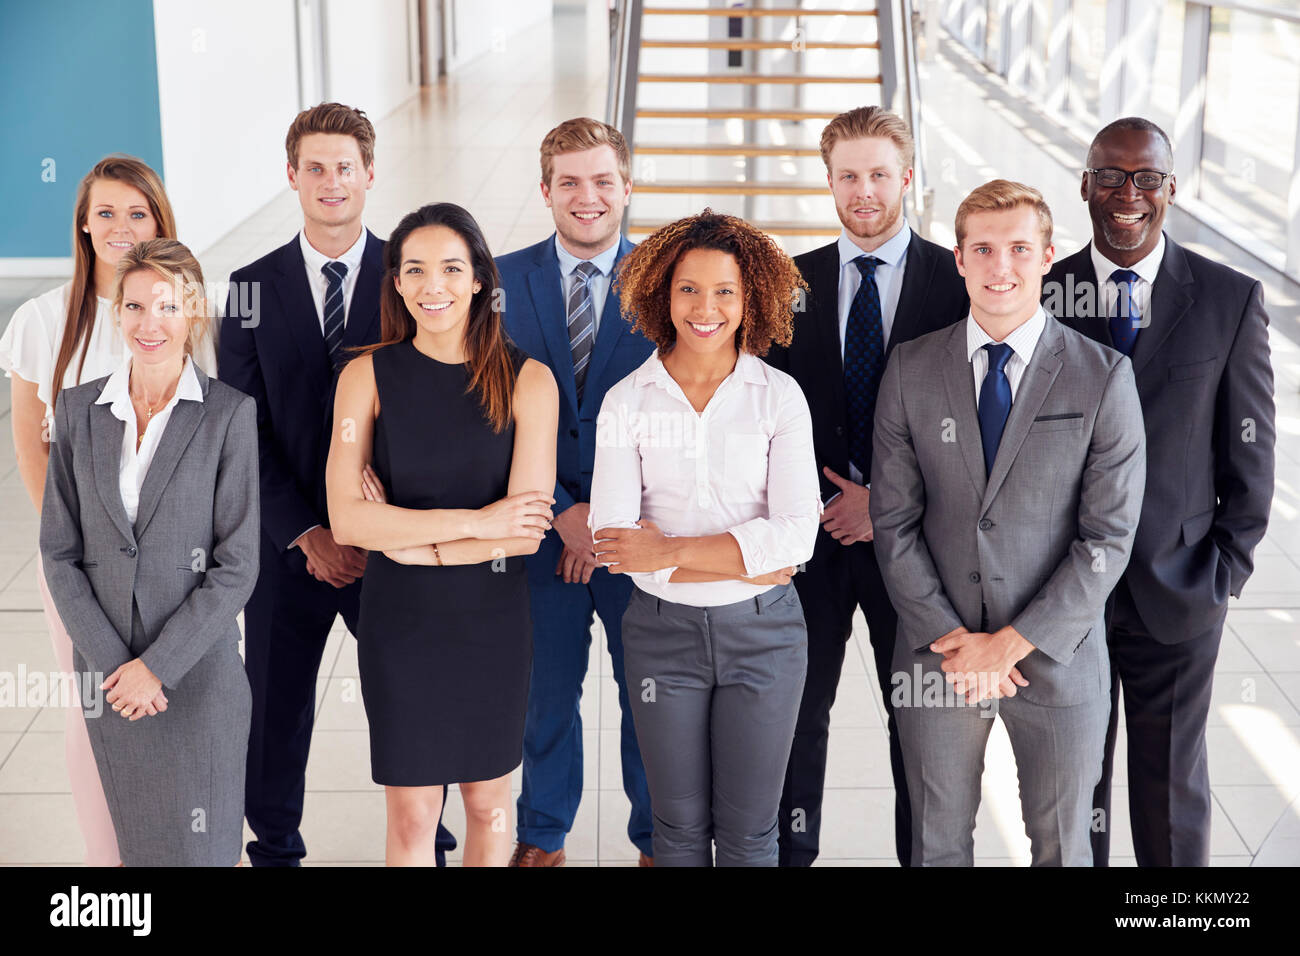 Office workers in a modern lobby, group portrait Stock Photo